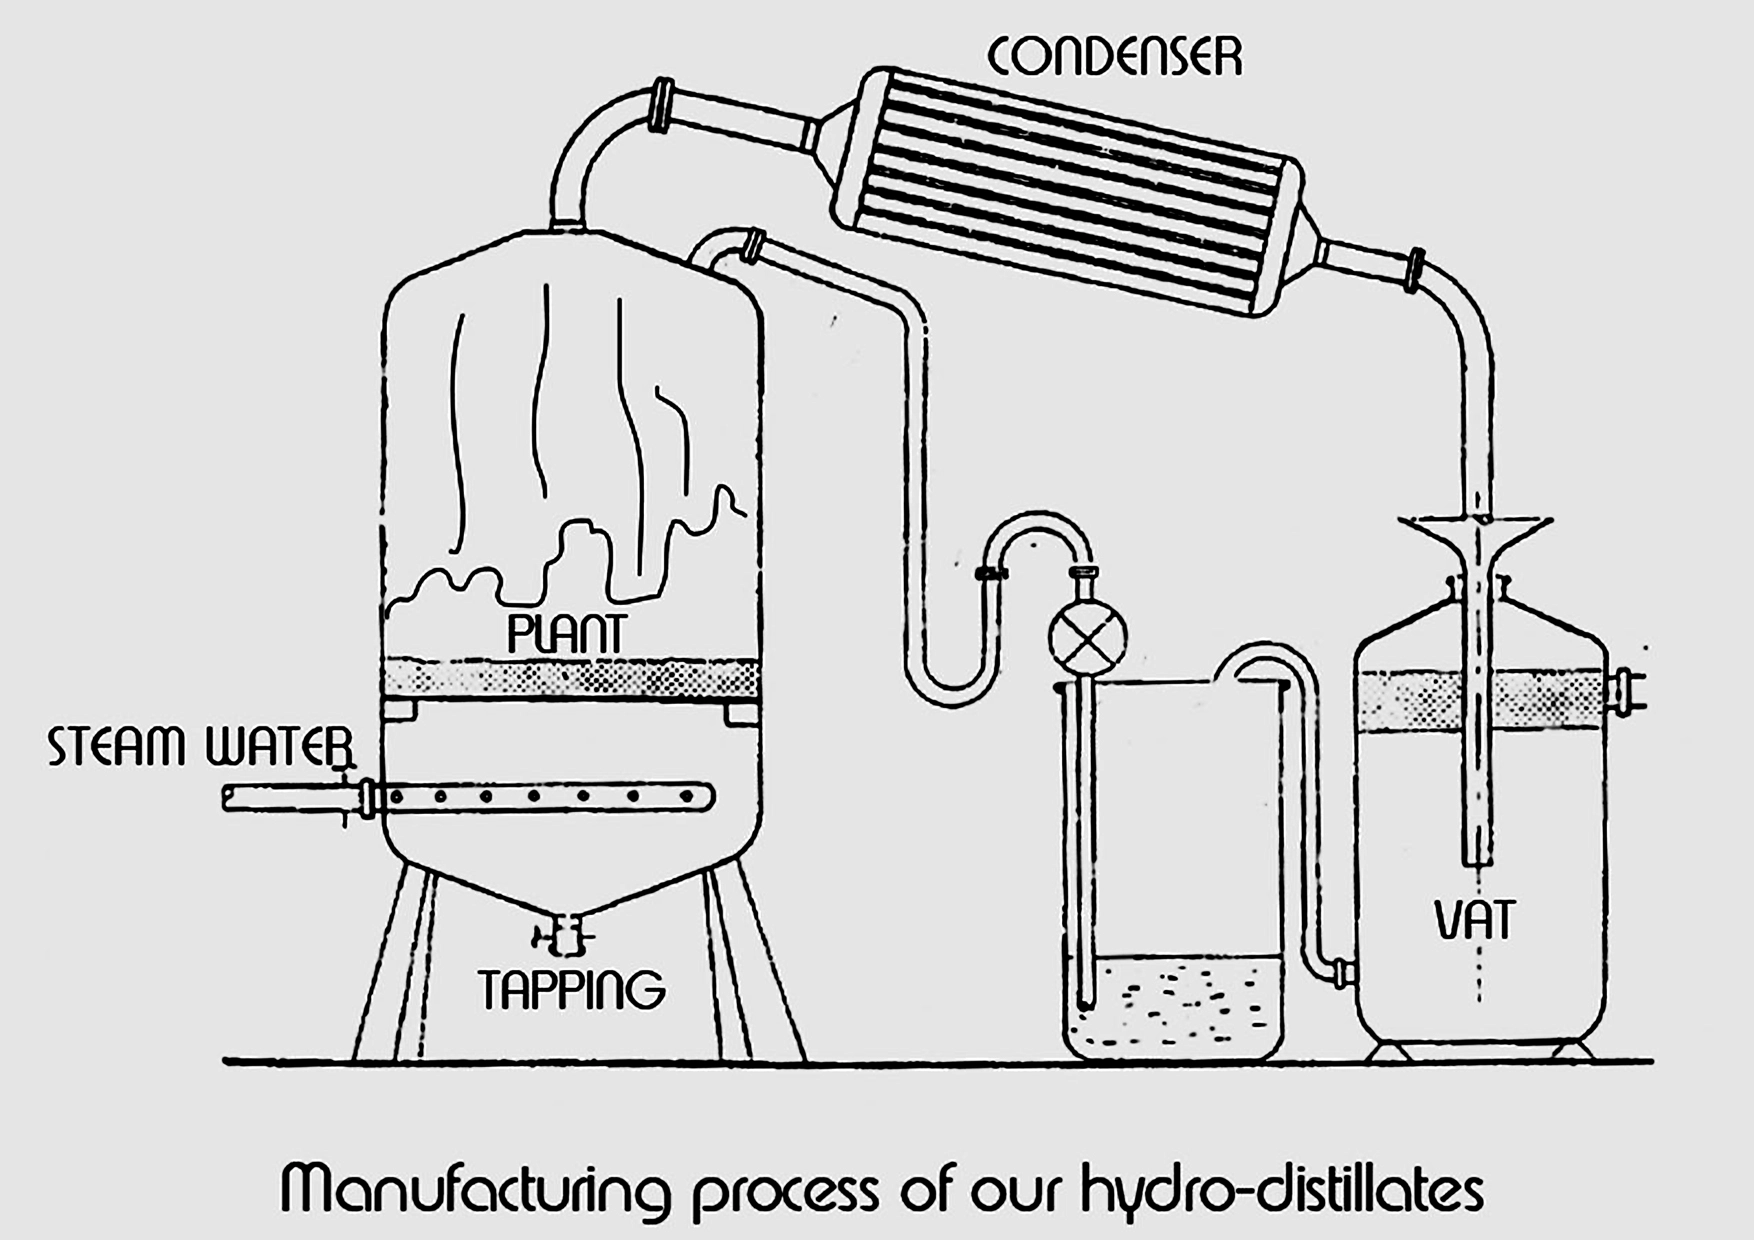 Manufacturing Process of Hydro-distillates